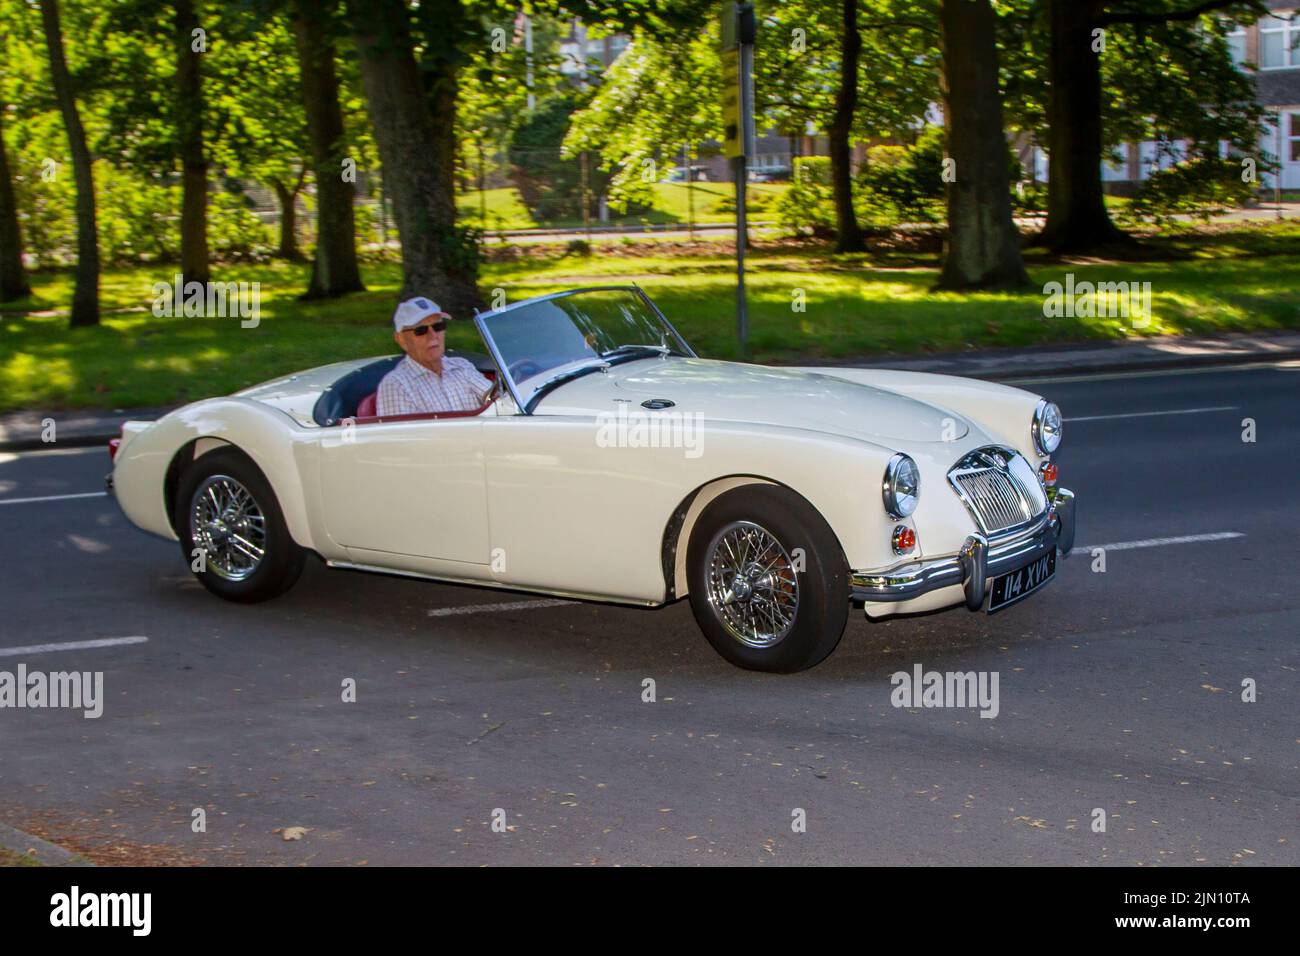 1960 60s, sixties white MG A 1600cc British sports car; Collectable cars are travelling to display at the 13th Lytham Hall Summer Classic Car & Motorcycle Show, a Classic Vintage Collectible Transport Festival. Stock Photo